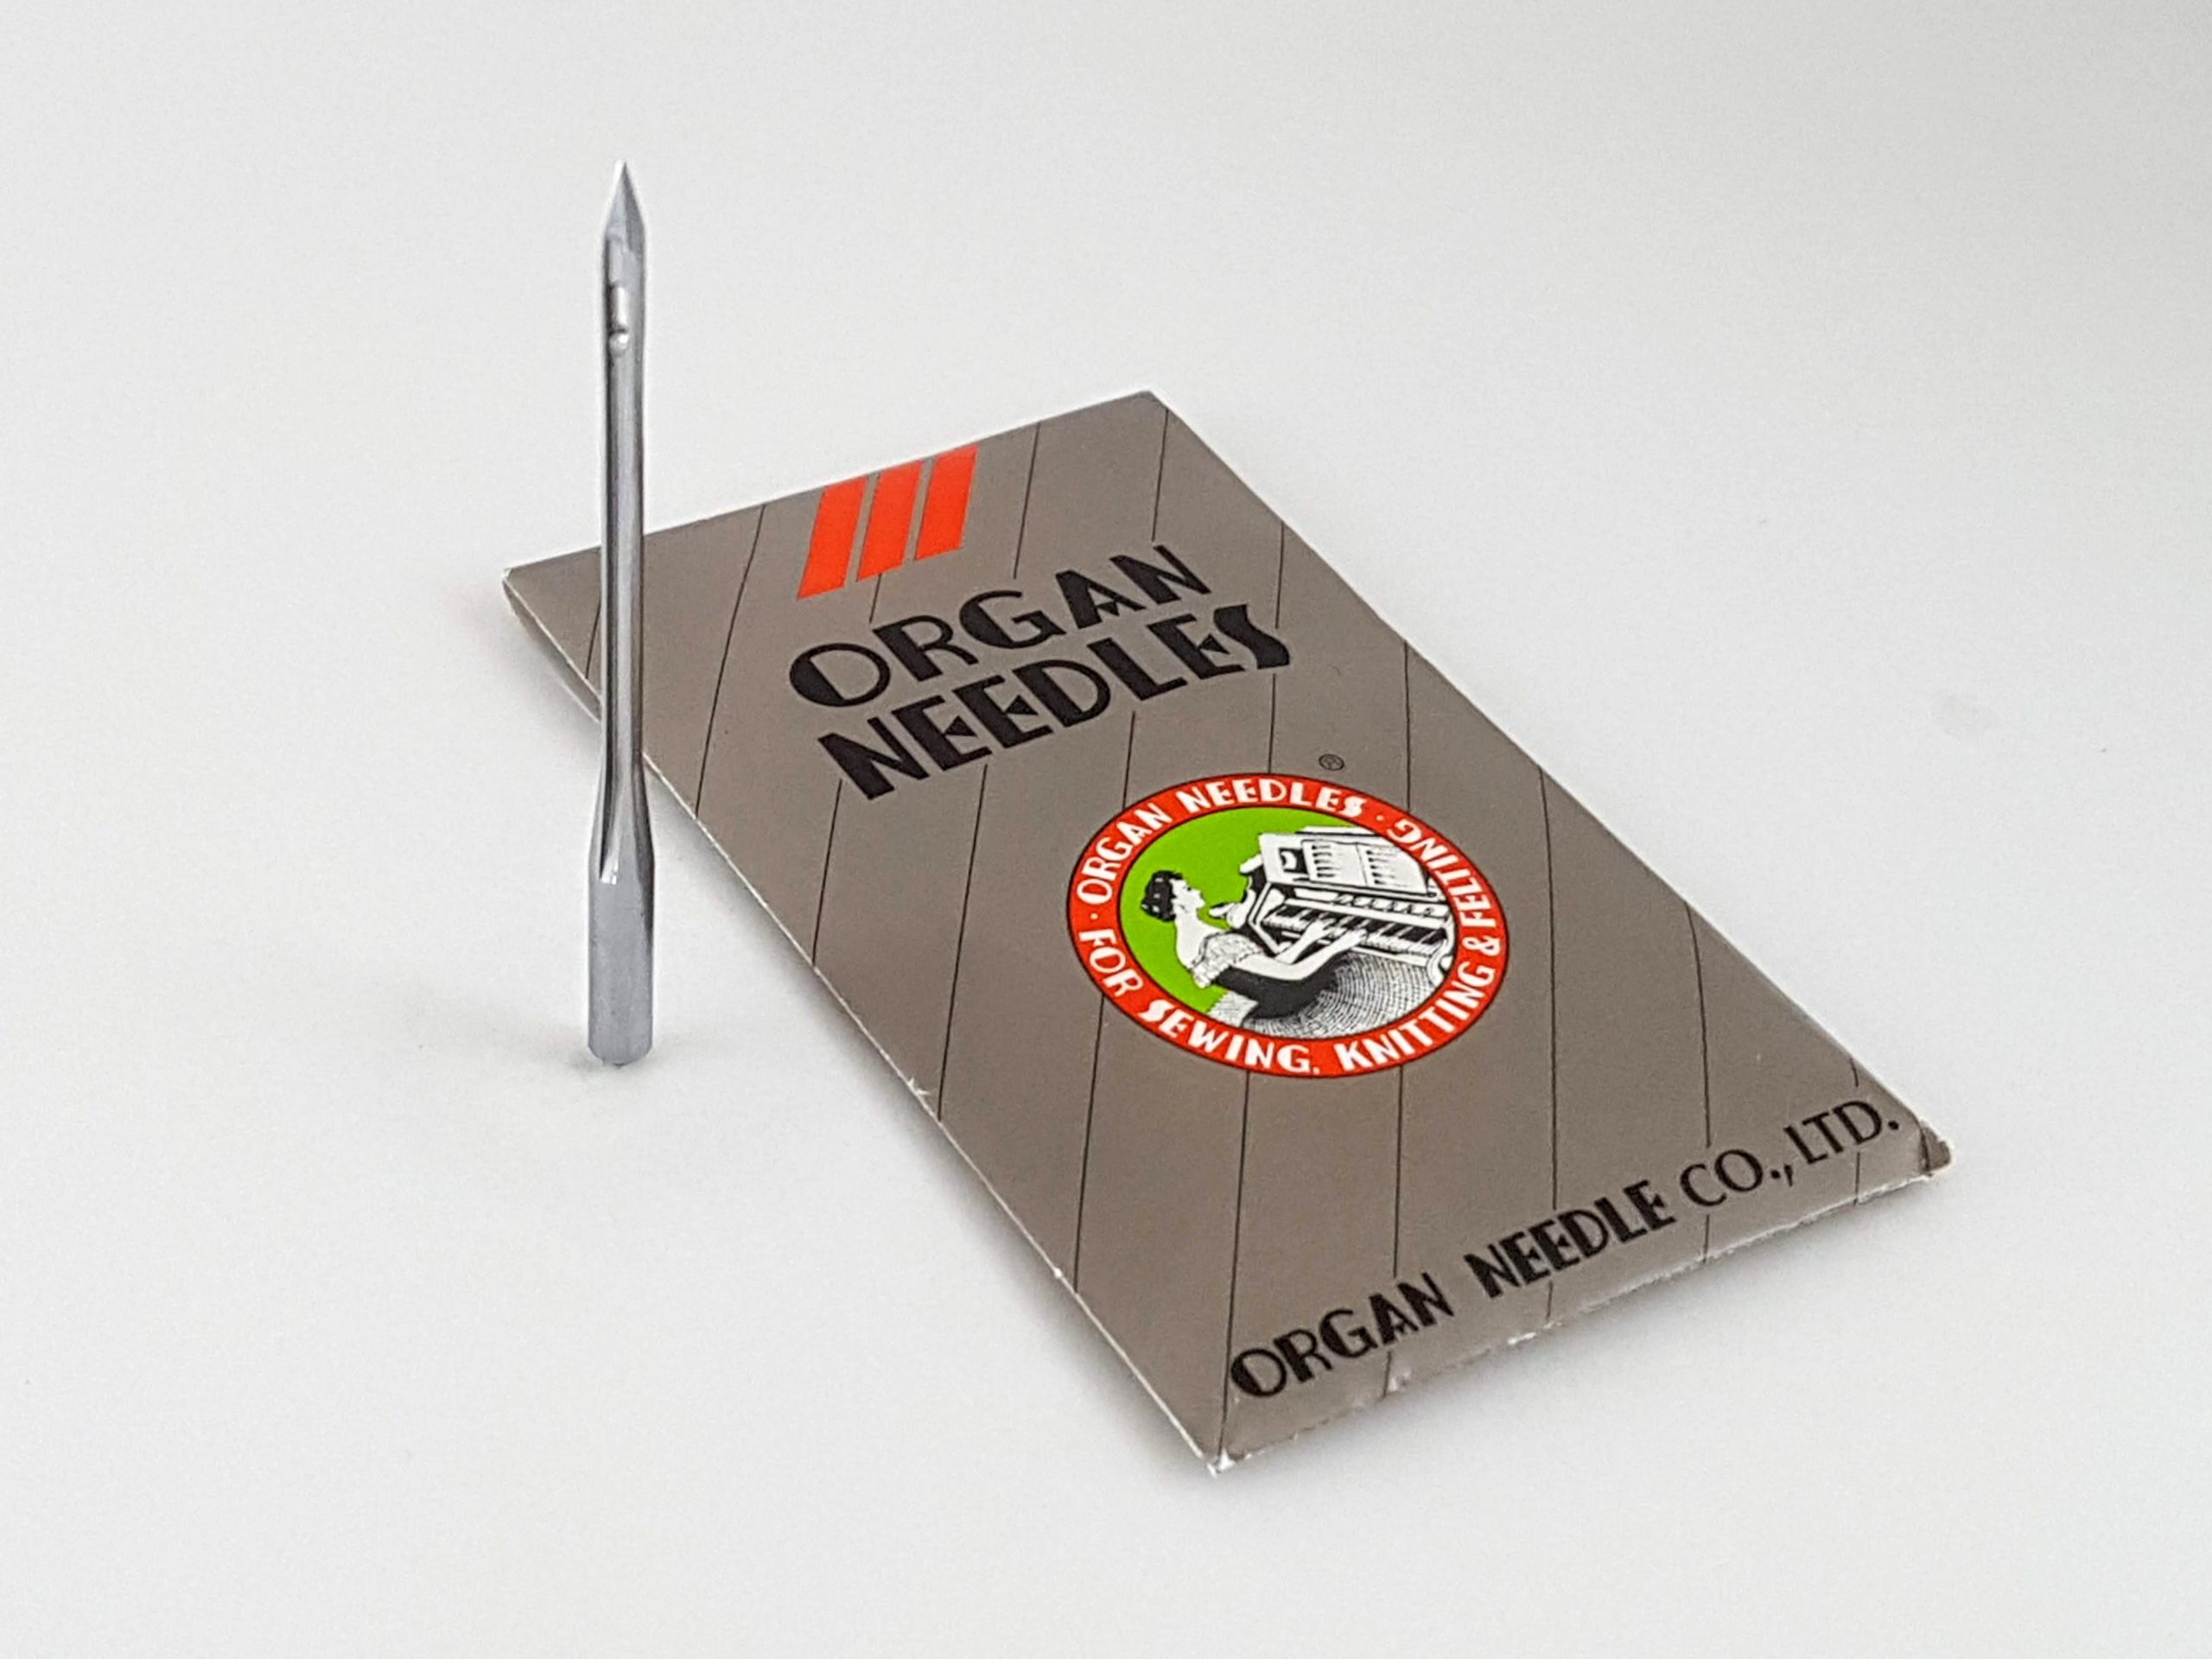 ORGAN NEEDLE CO., LTD. - Each and every needle we make for our customers  shall be handed over around the world in good faith.